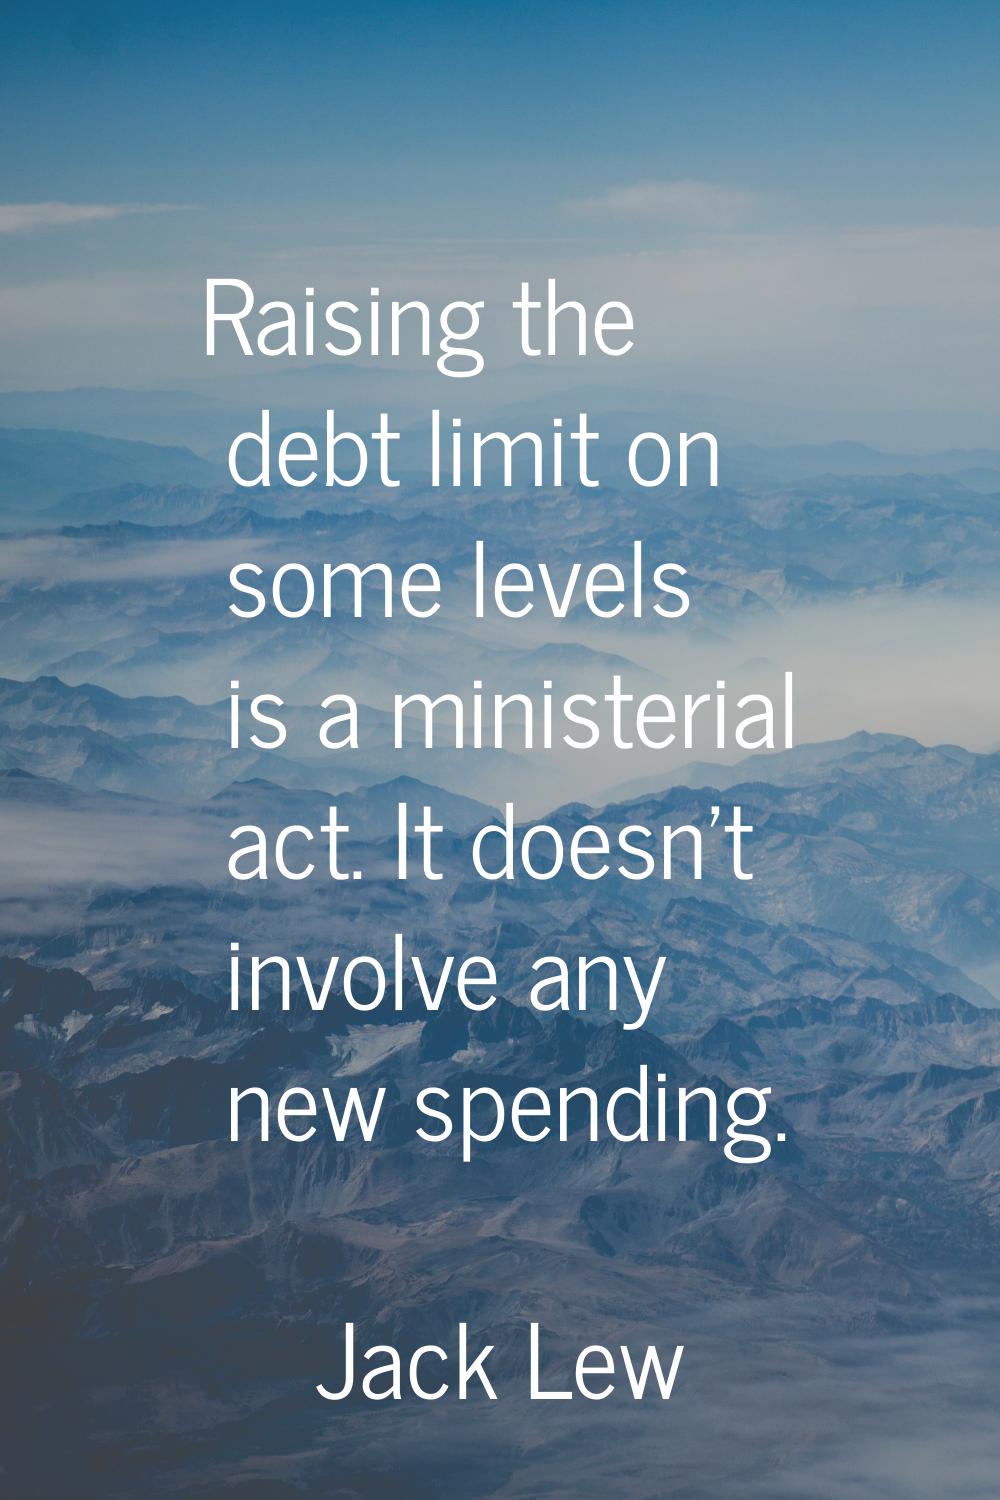 Raising the debt limit on some levels is a ministerial act. It doesn't involve any new spending.